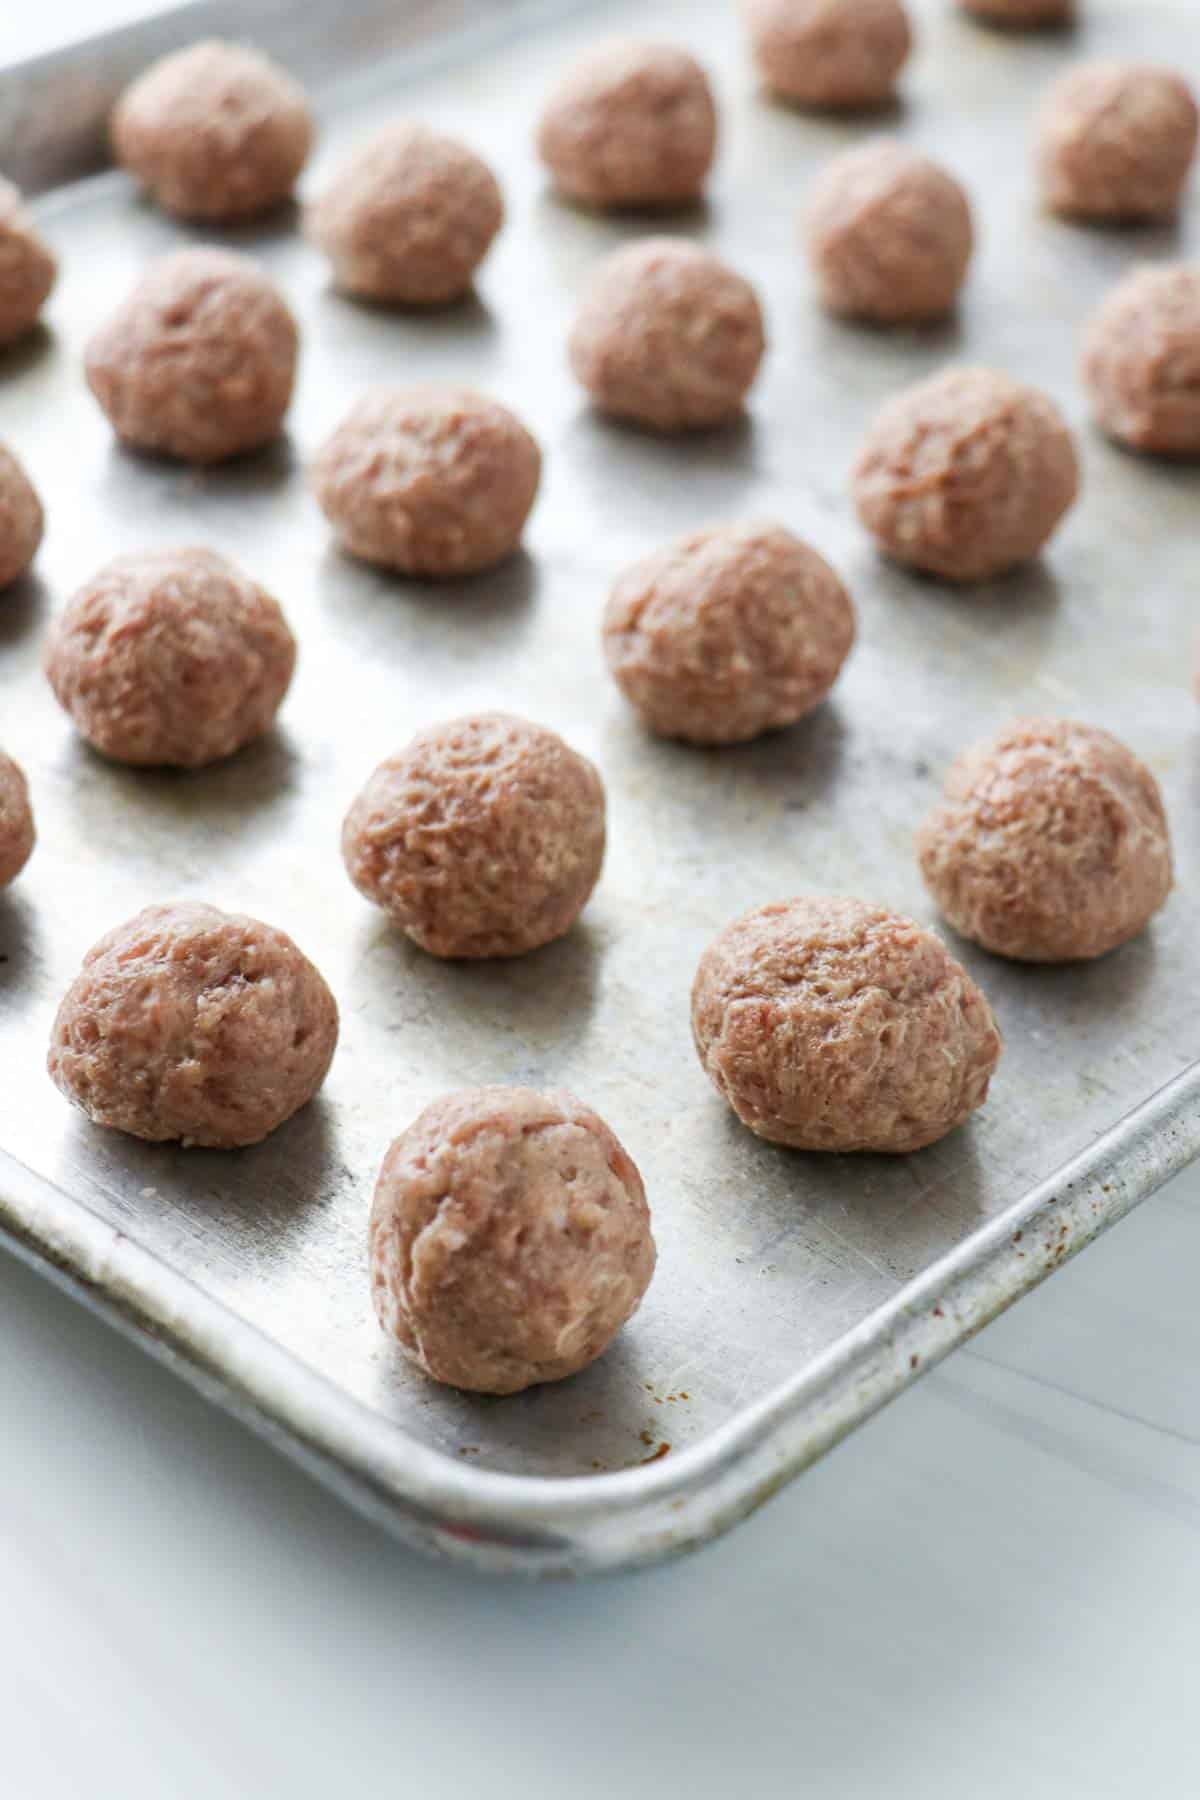 Uncooked, rolled Swedish Meatballs on a baking sheet.